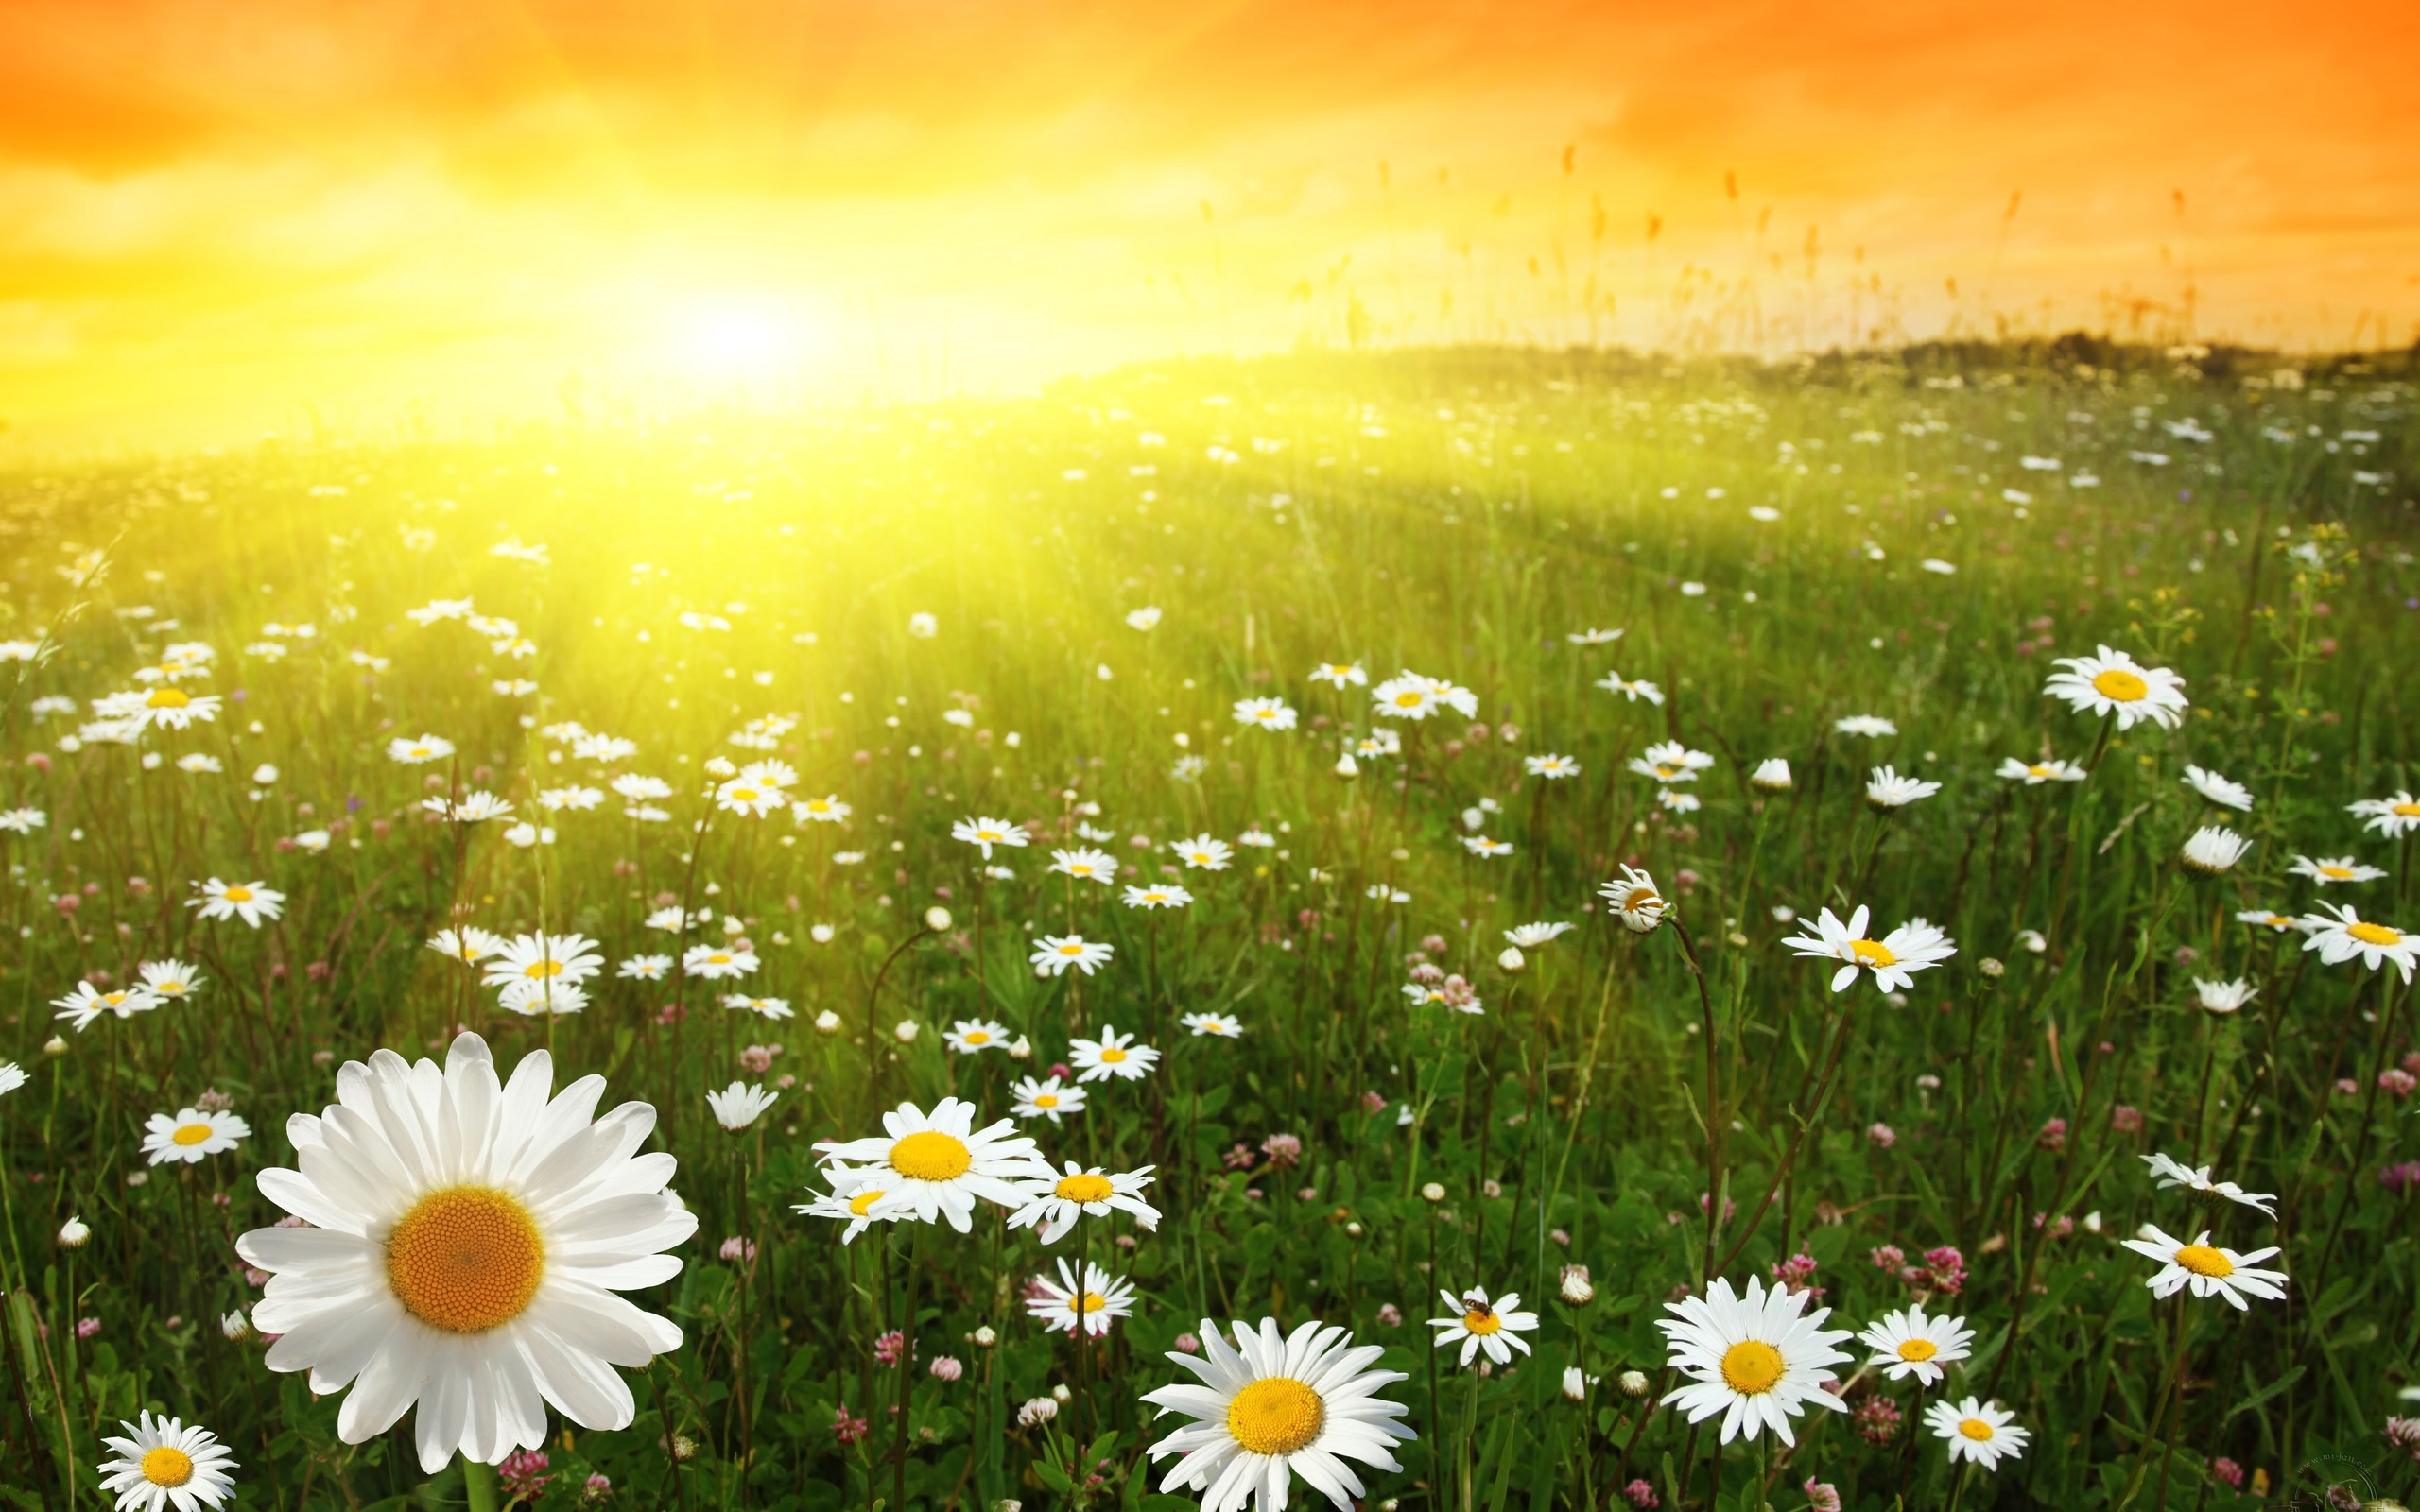 Lovely Sunny Day in the Field - HD Wallpapers